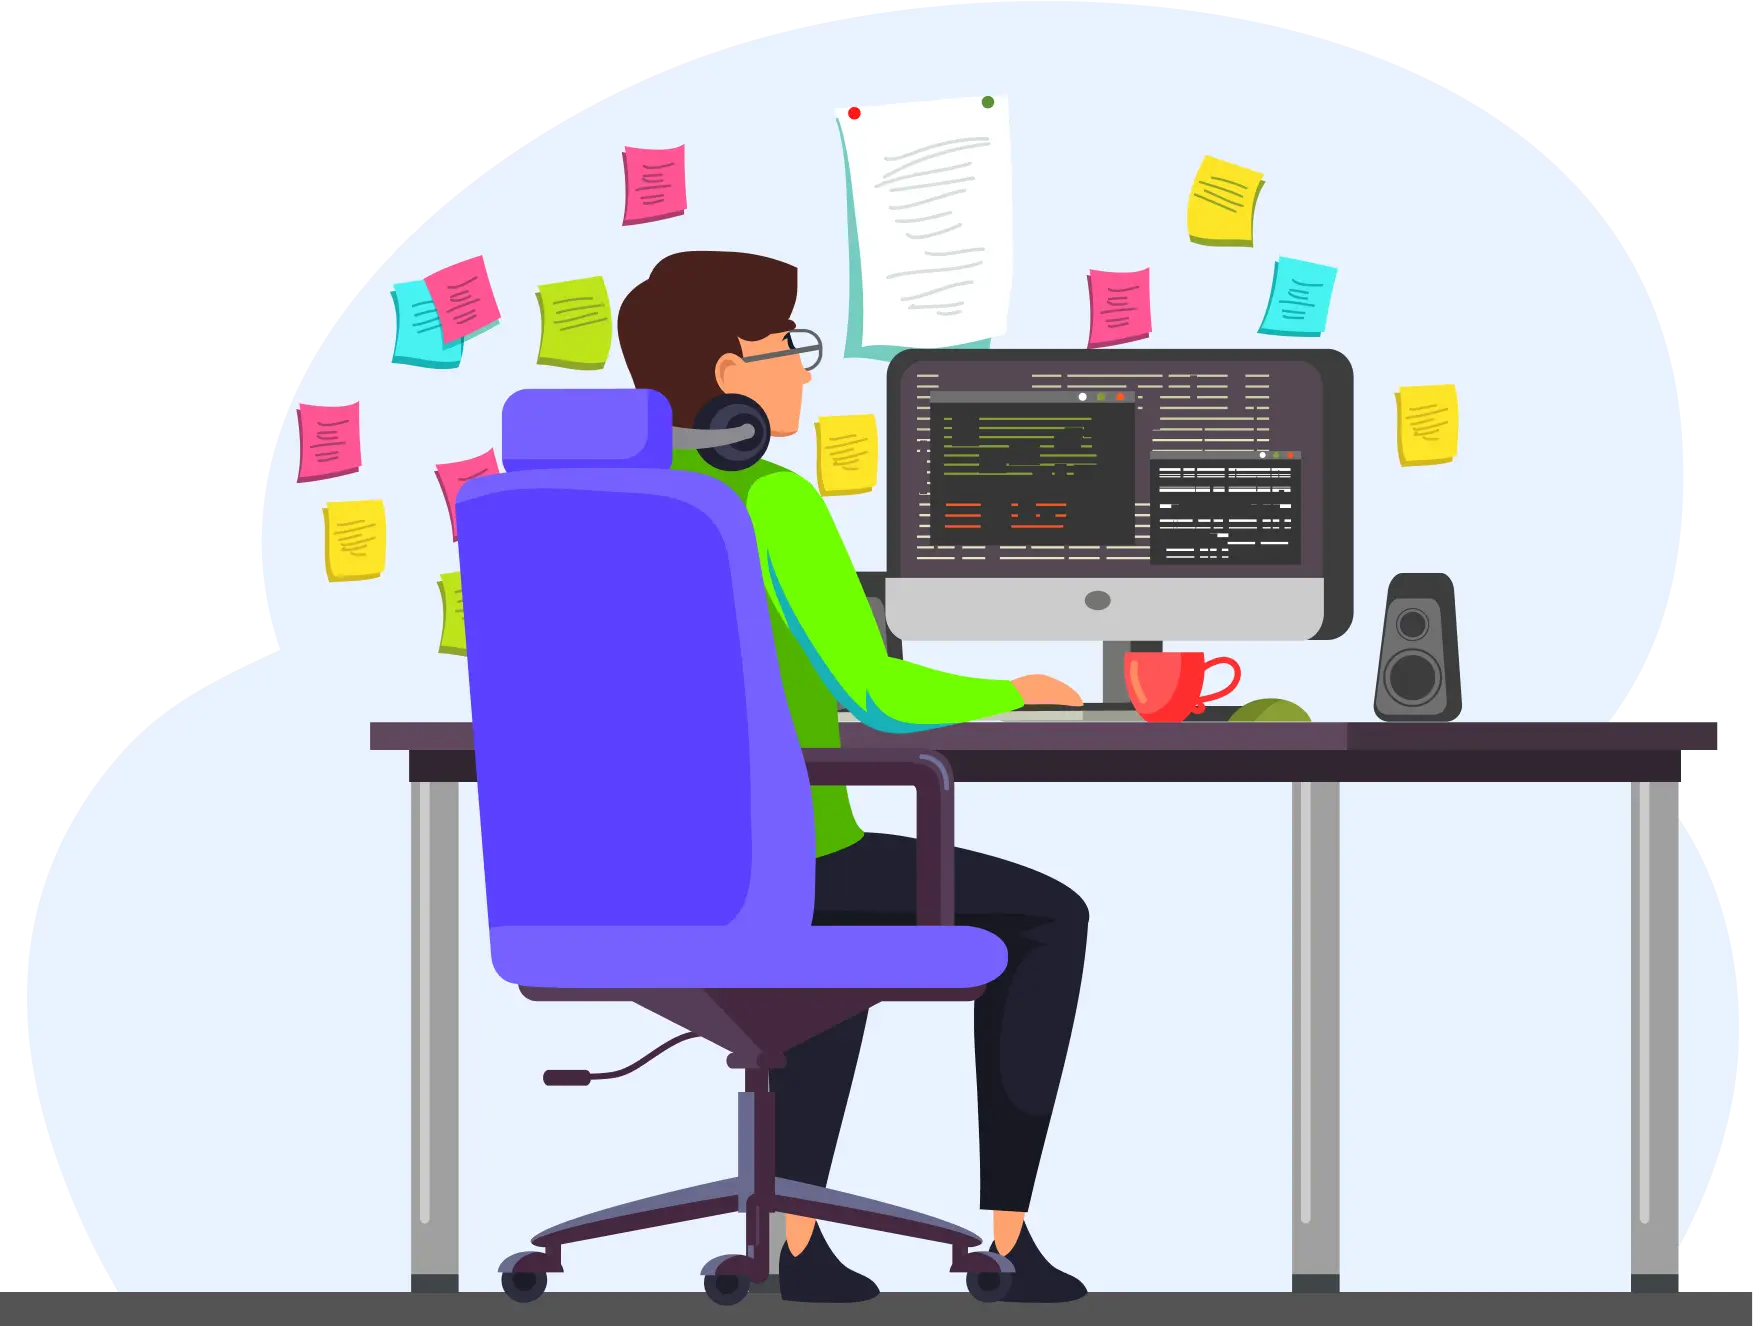 A boy working on a PC by sitting on a chair, wearing earphones. A cup on the desk and a speaker. Also, some sticky notes on the wall